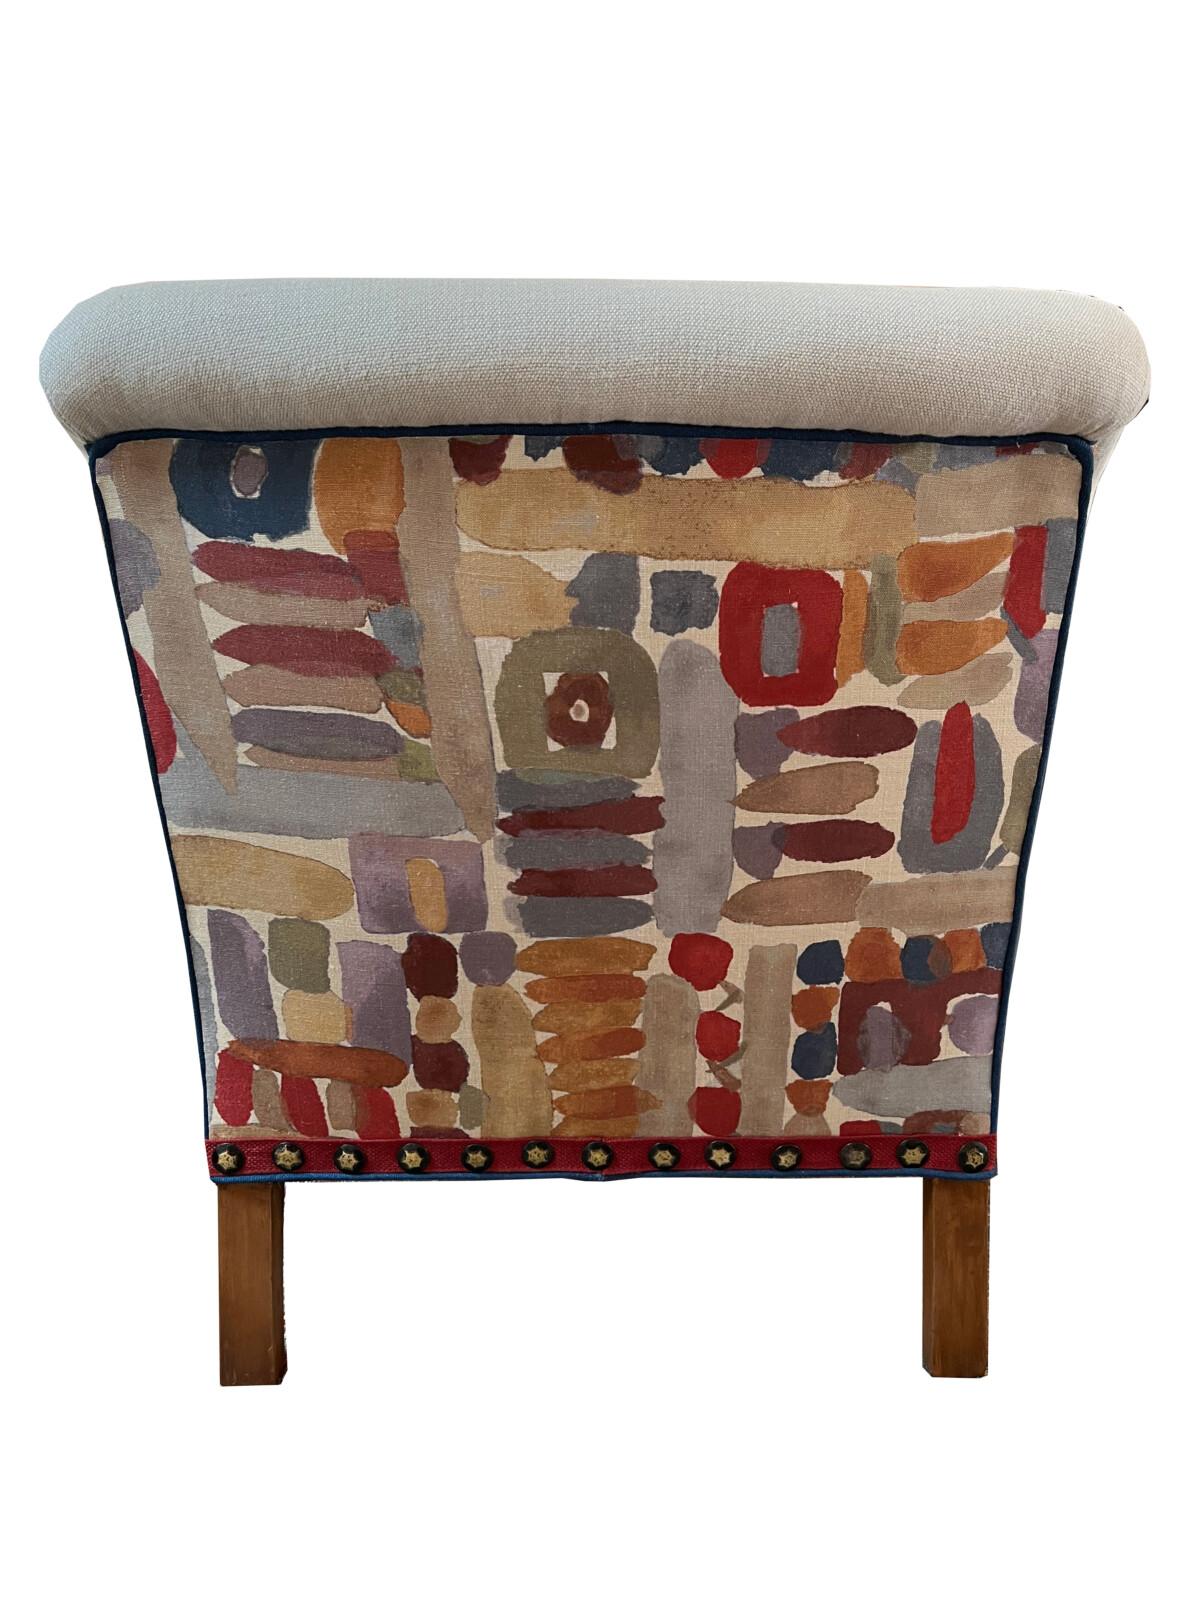 Radnor Chair with Thomas O’Brien fabric on back In Good Condition For Sale In Sag Harbor, NY